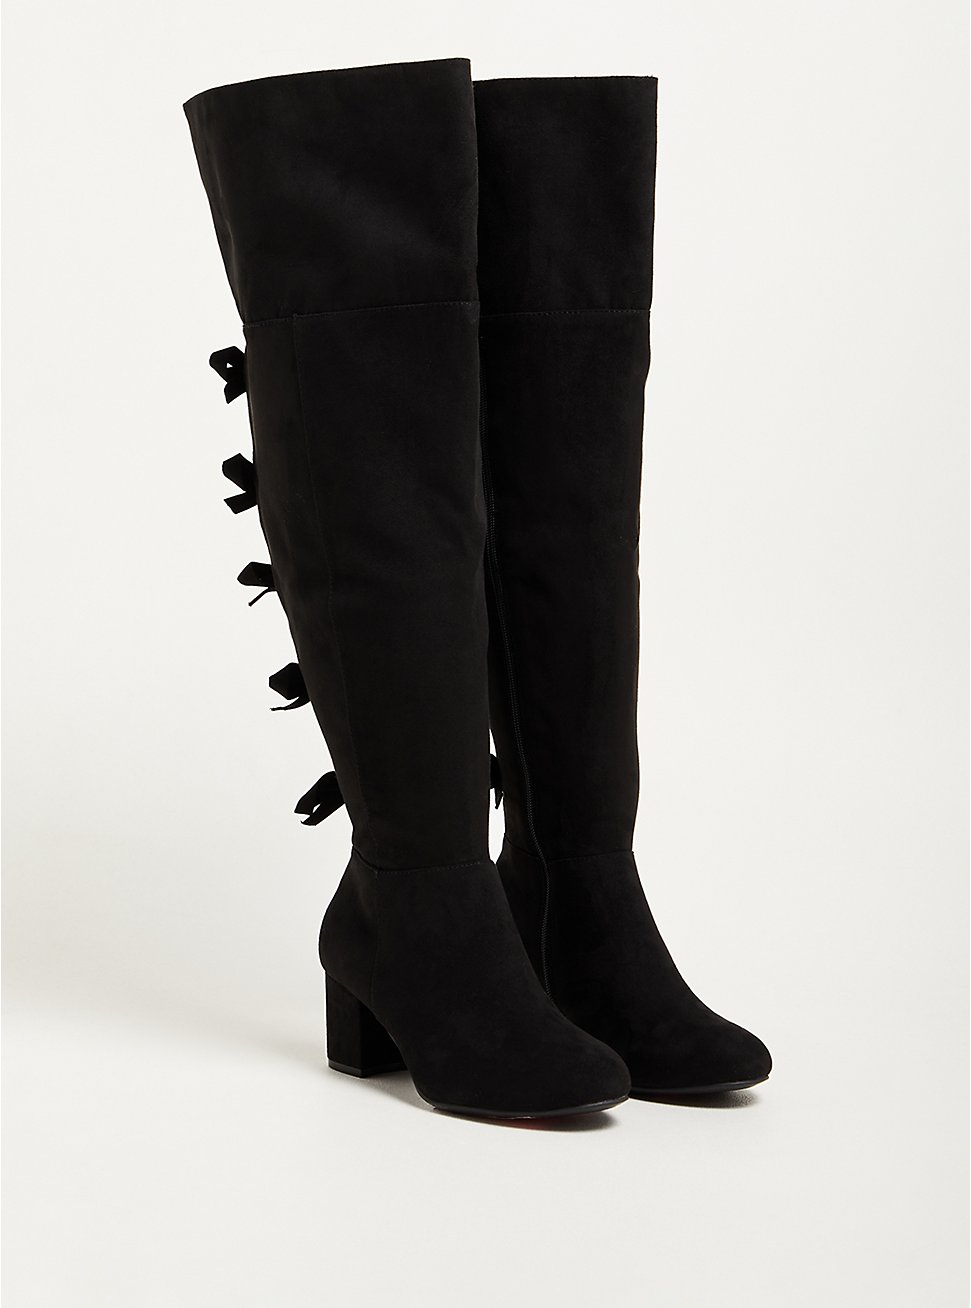 Bow Back Over The Knee Boot - Black Faux Suede (WW), BLACK, hi-res